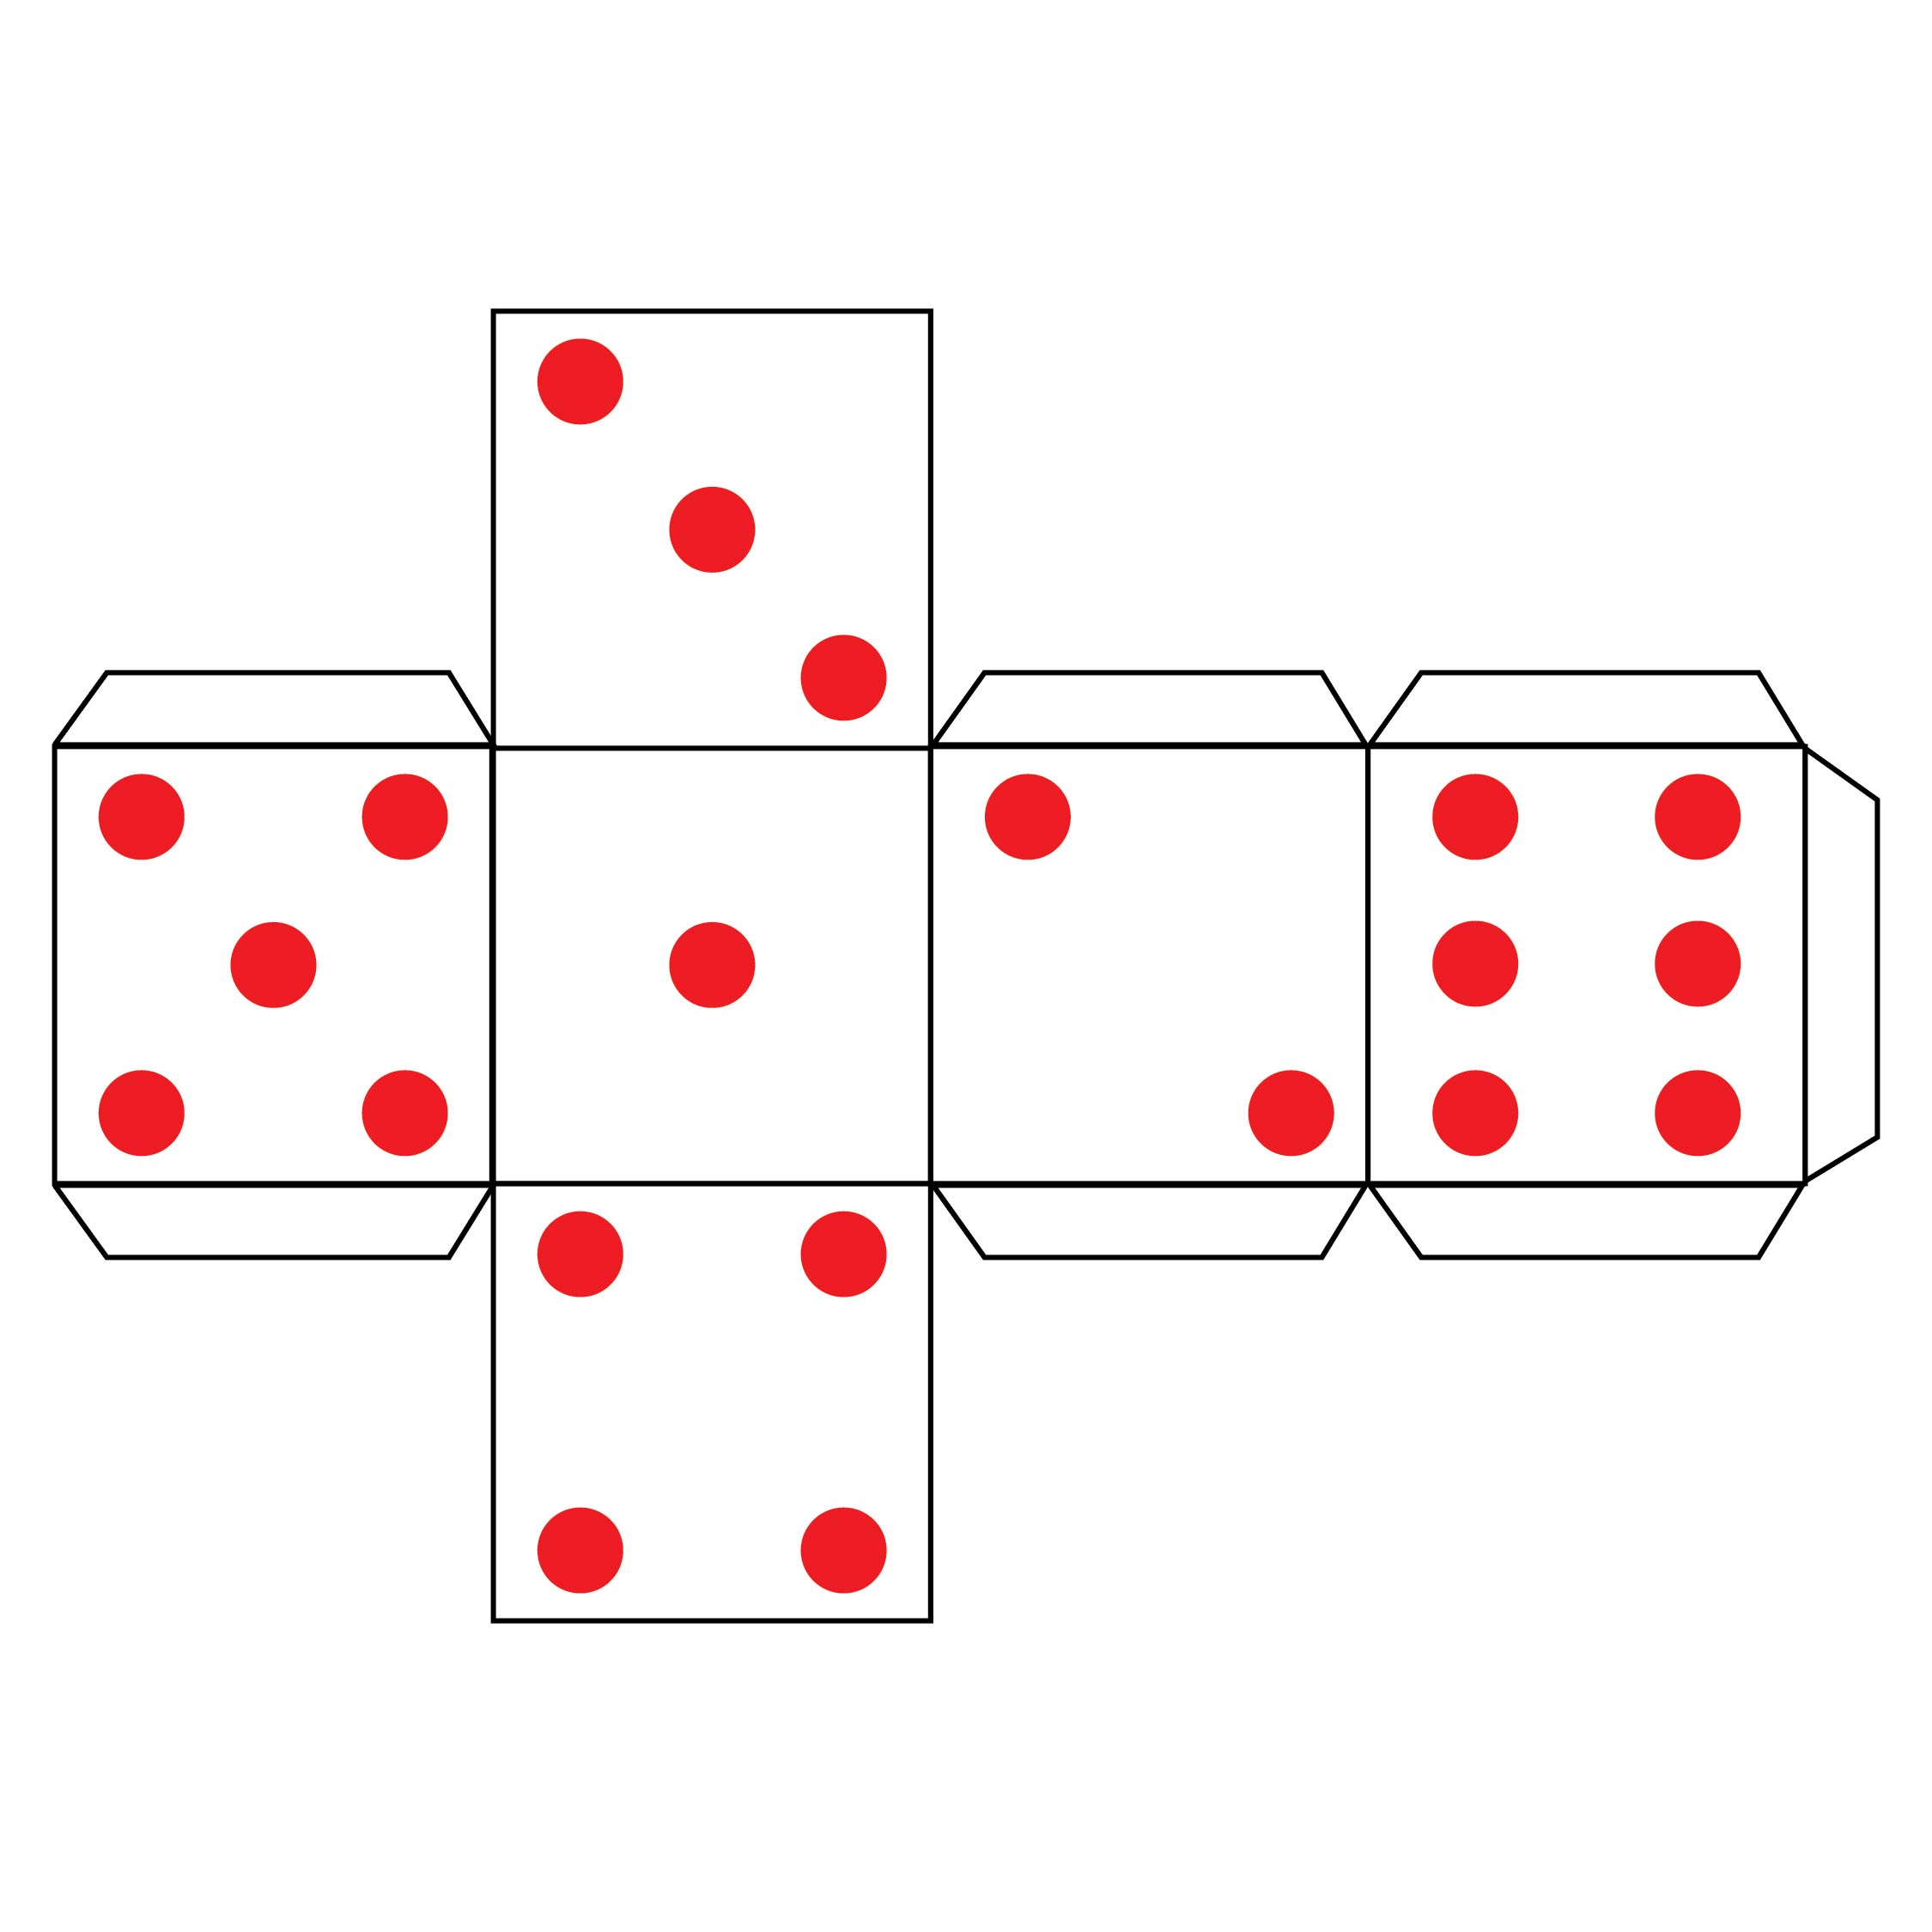 Is 3d dice template sides always in squares? 